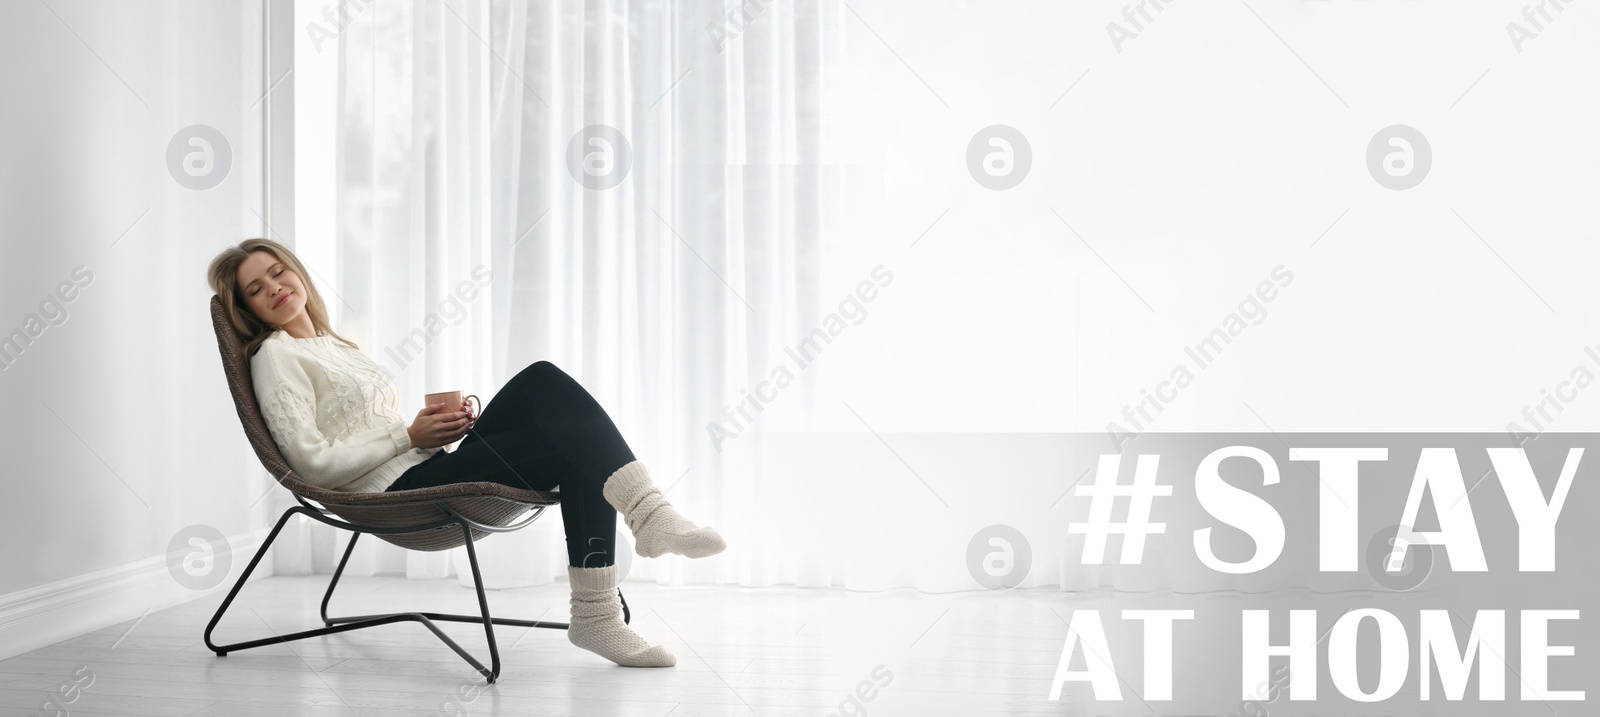 Image of Hashtag Stay At Home - protective measure during coronavirus pandemic, banner design. Young woman resting in armchair near window